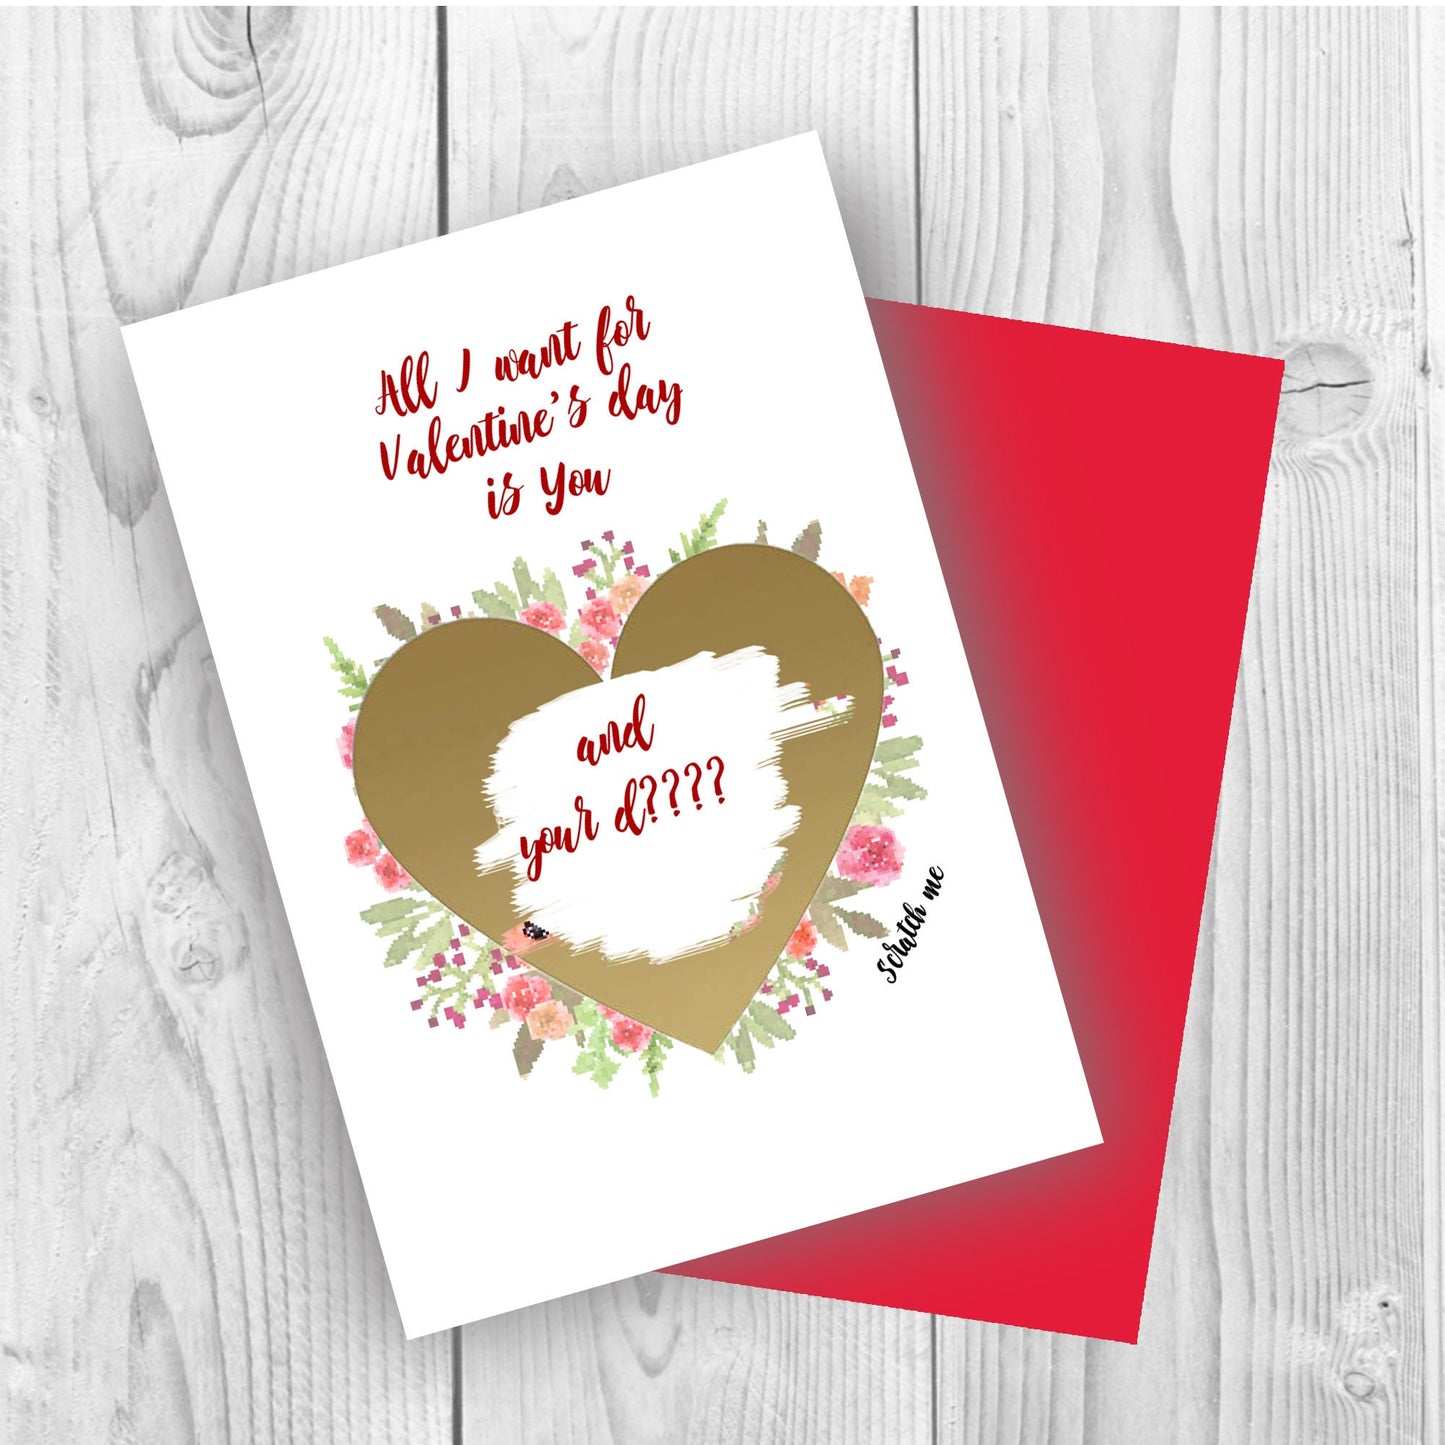 Valentine's Day Card - All I want for Valentine's day is...